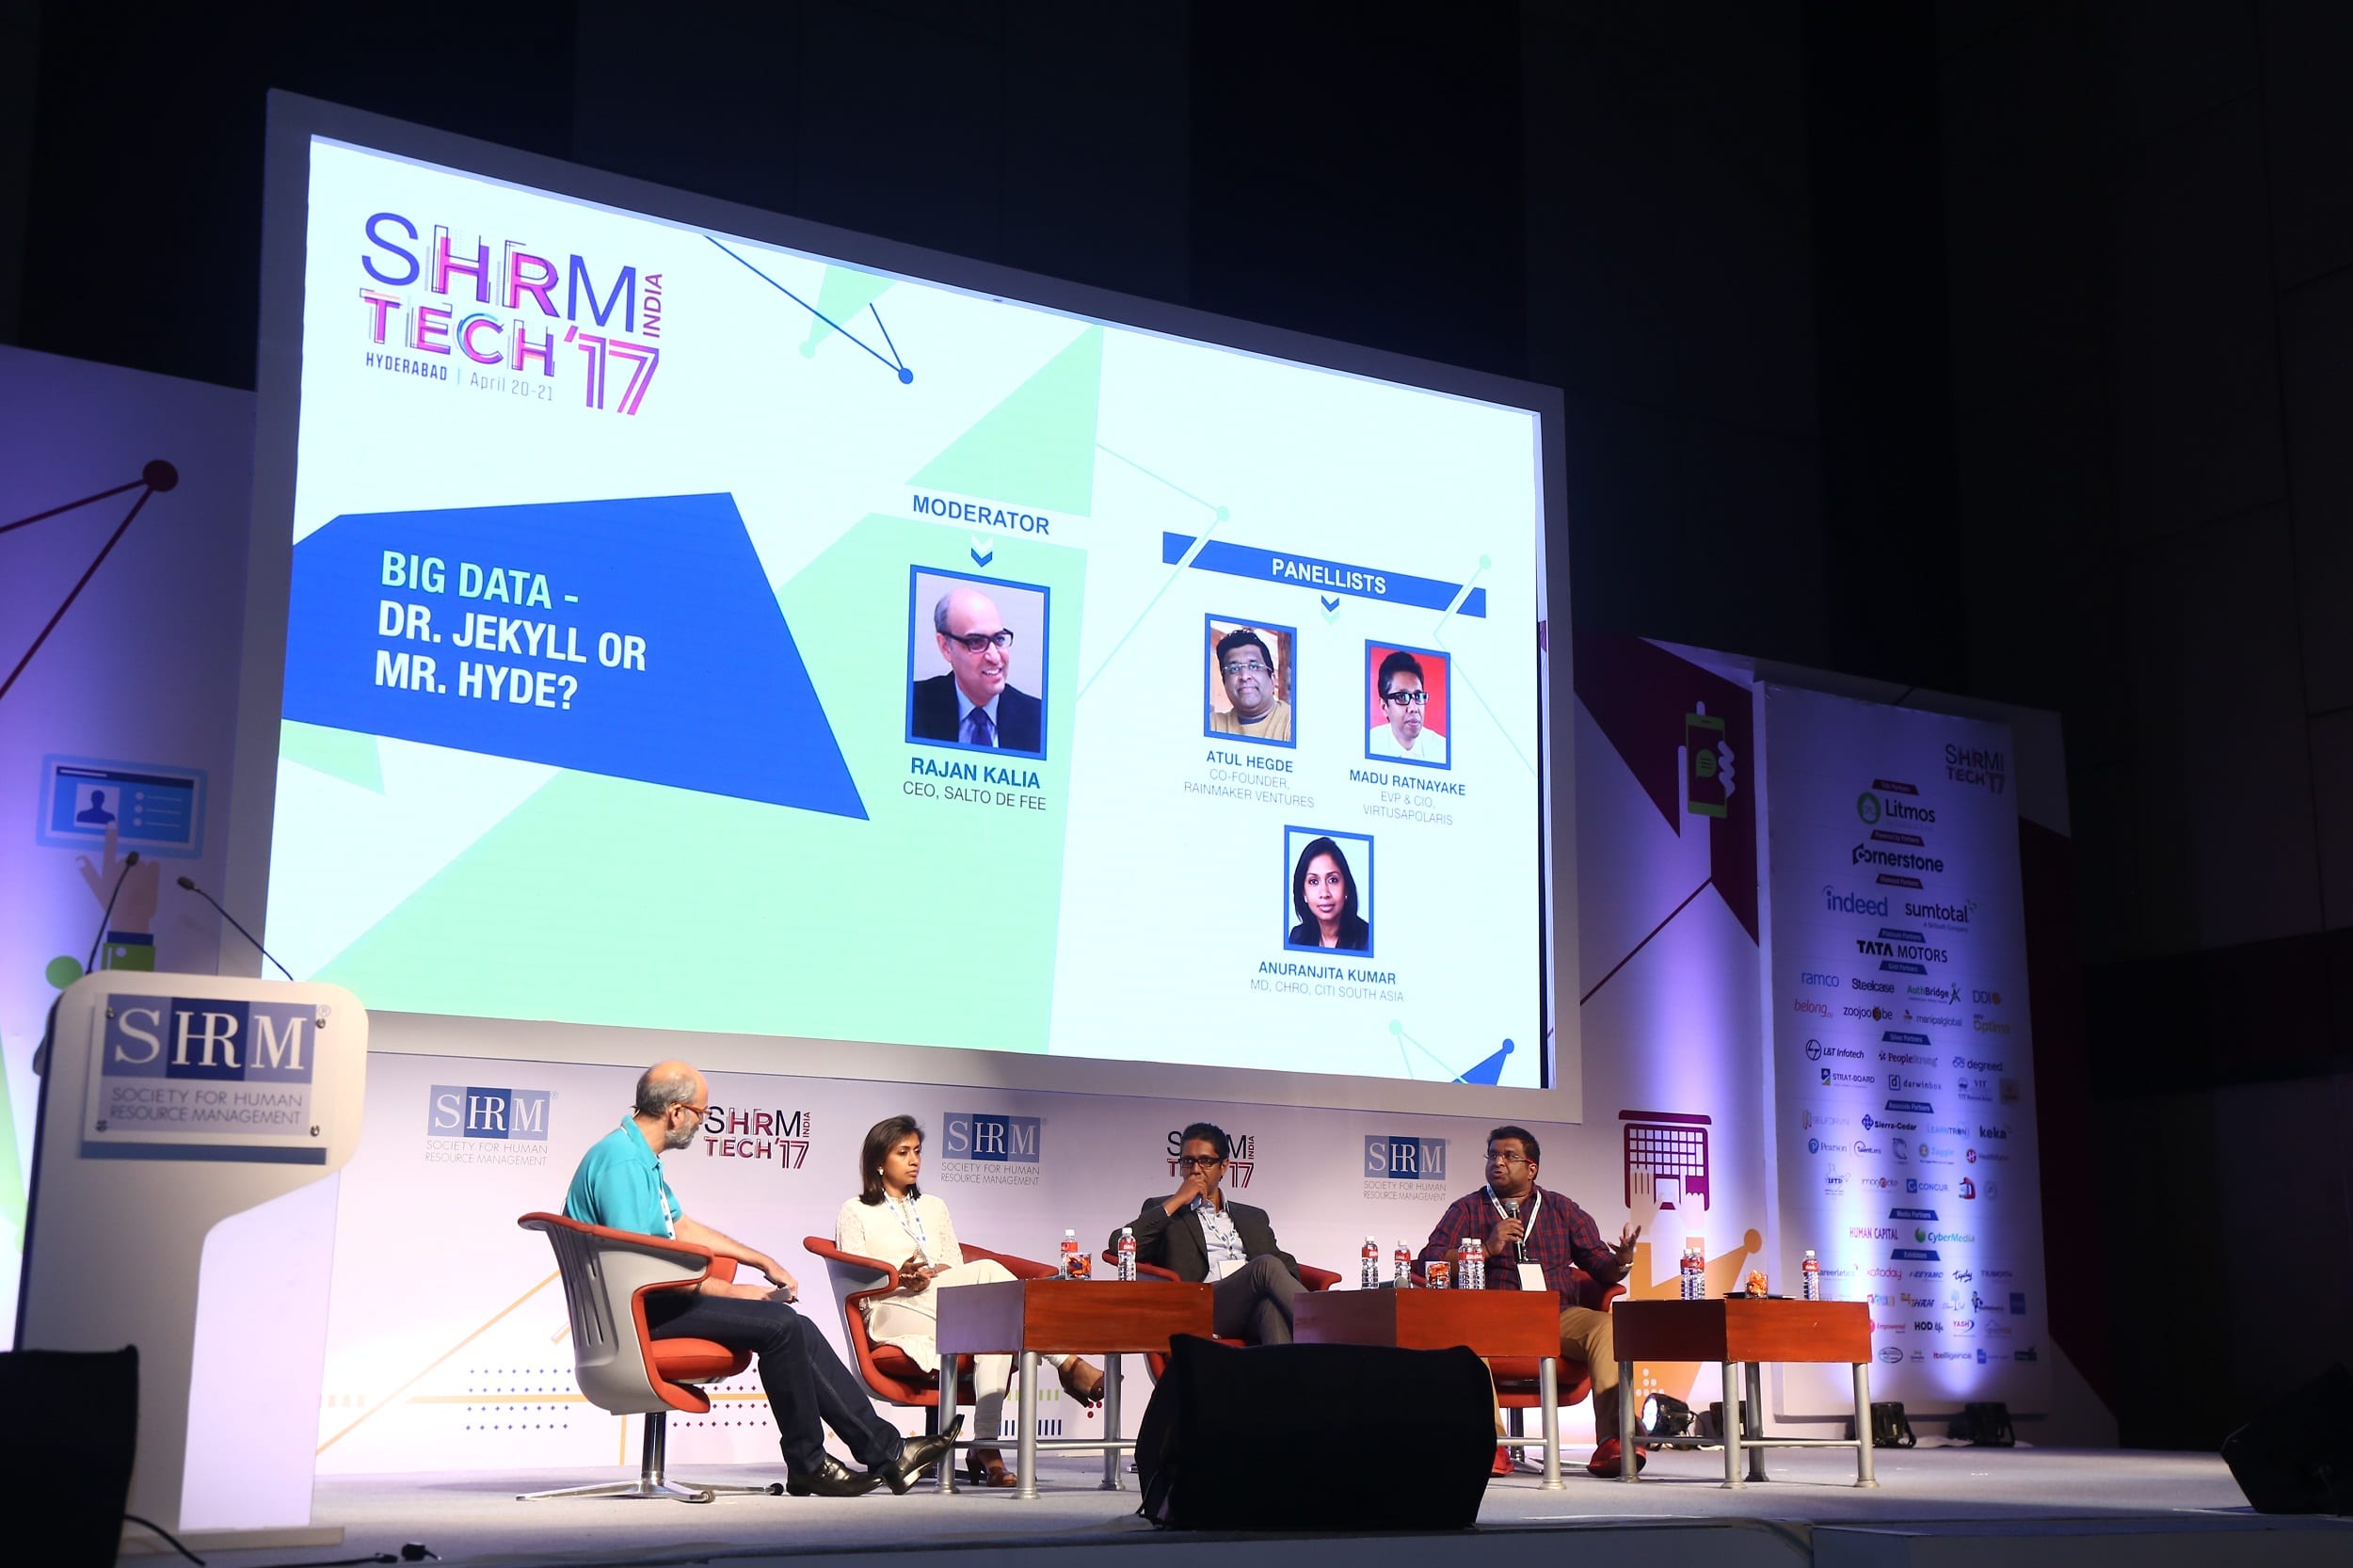 SHRM India presents ‘3rd HR TechConference 2017’ successfully